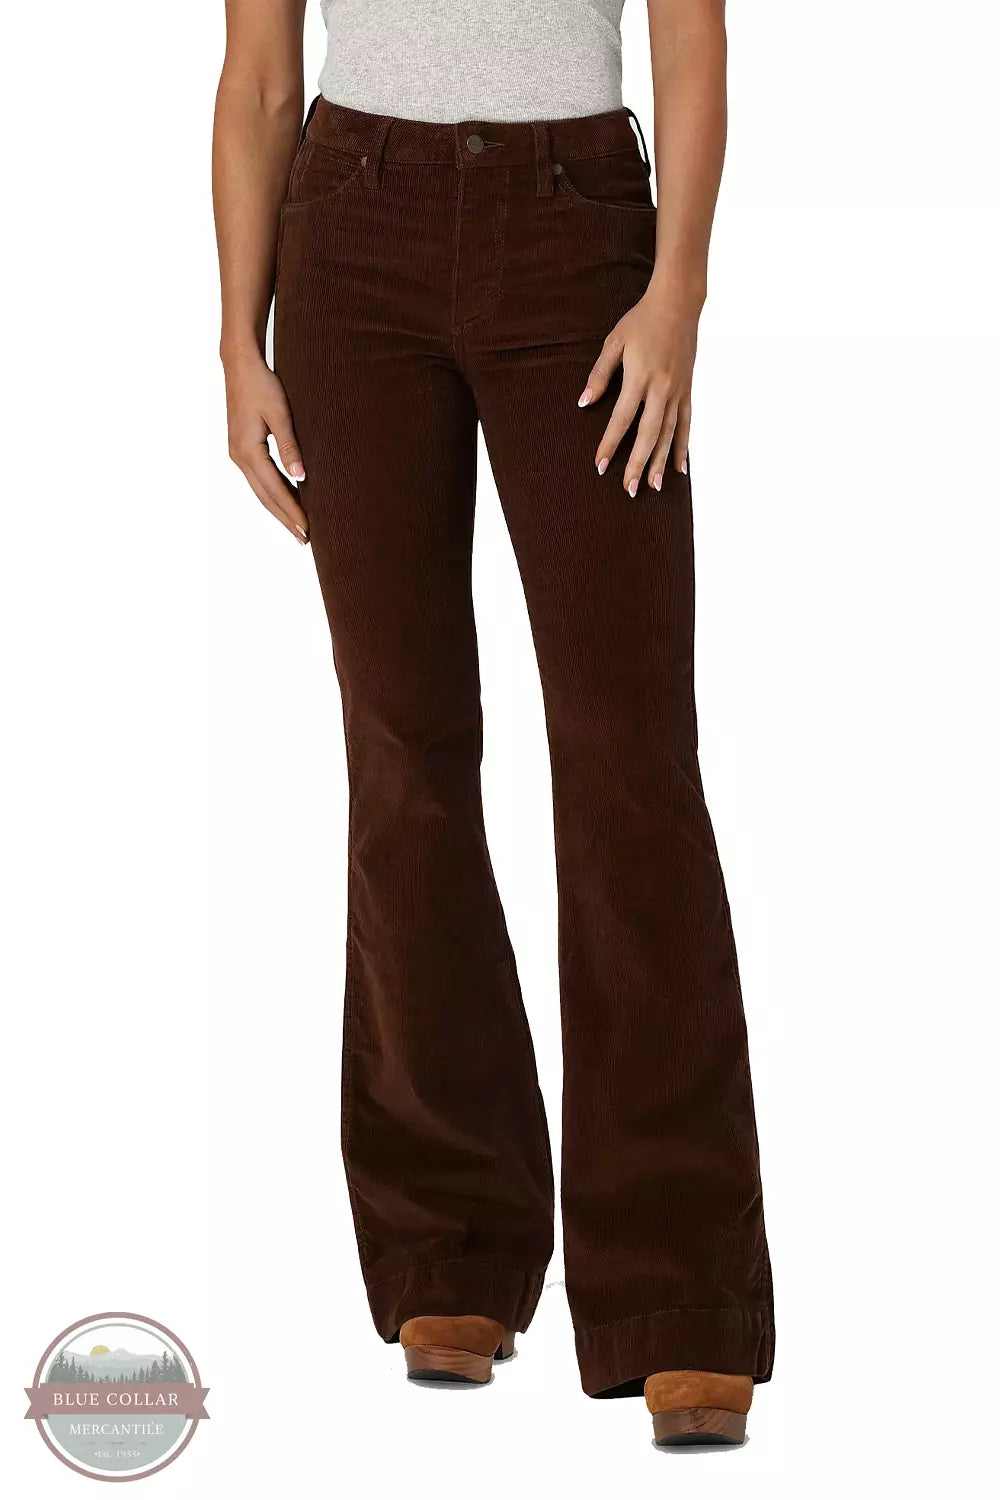 Wrangler 112336740 Retro High Rise Corduroy Trouser Jeans in Brooke Front View